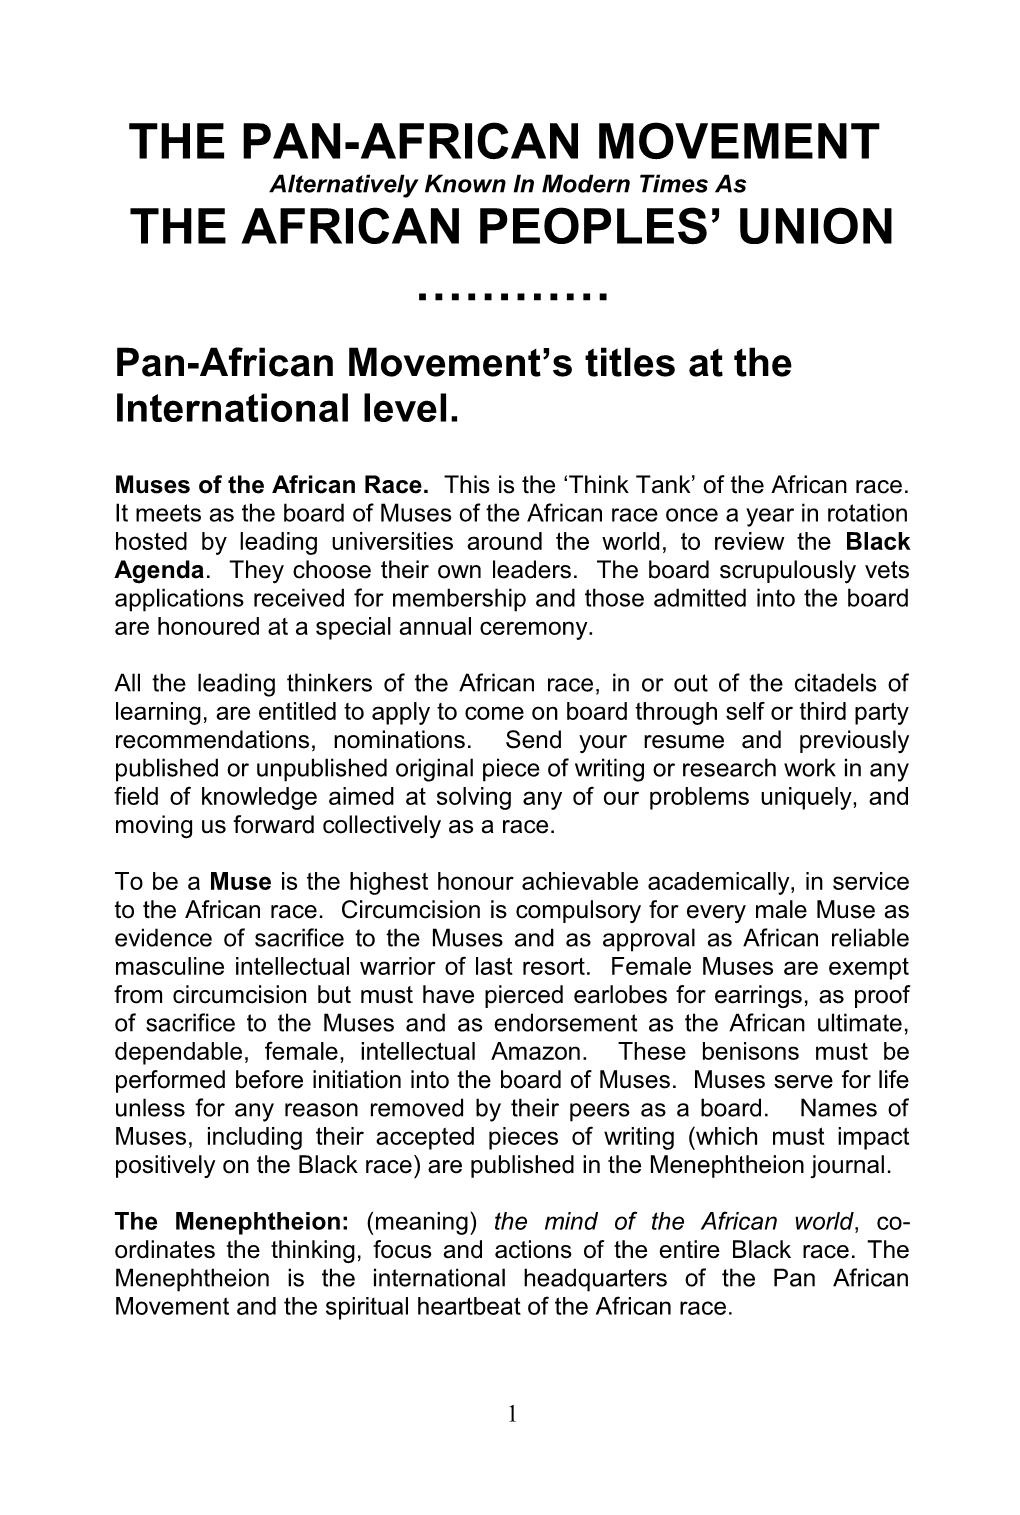 The Pan-African Movement